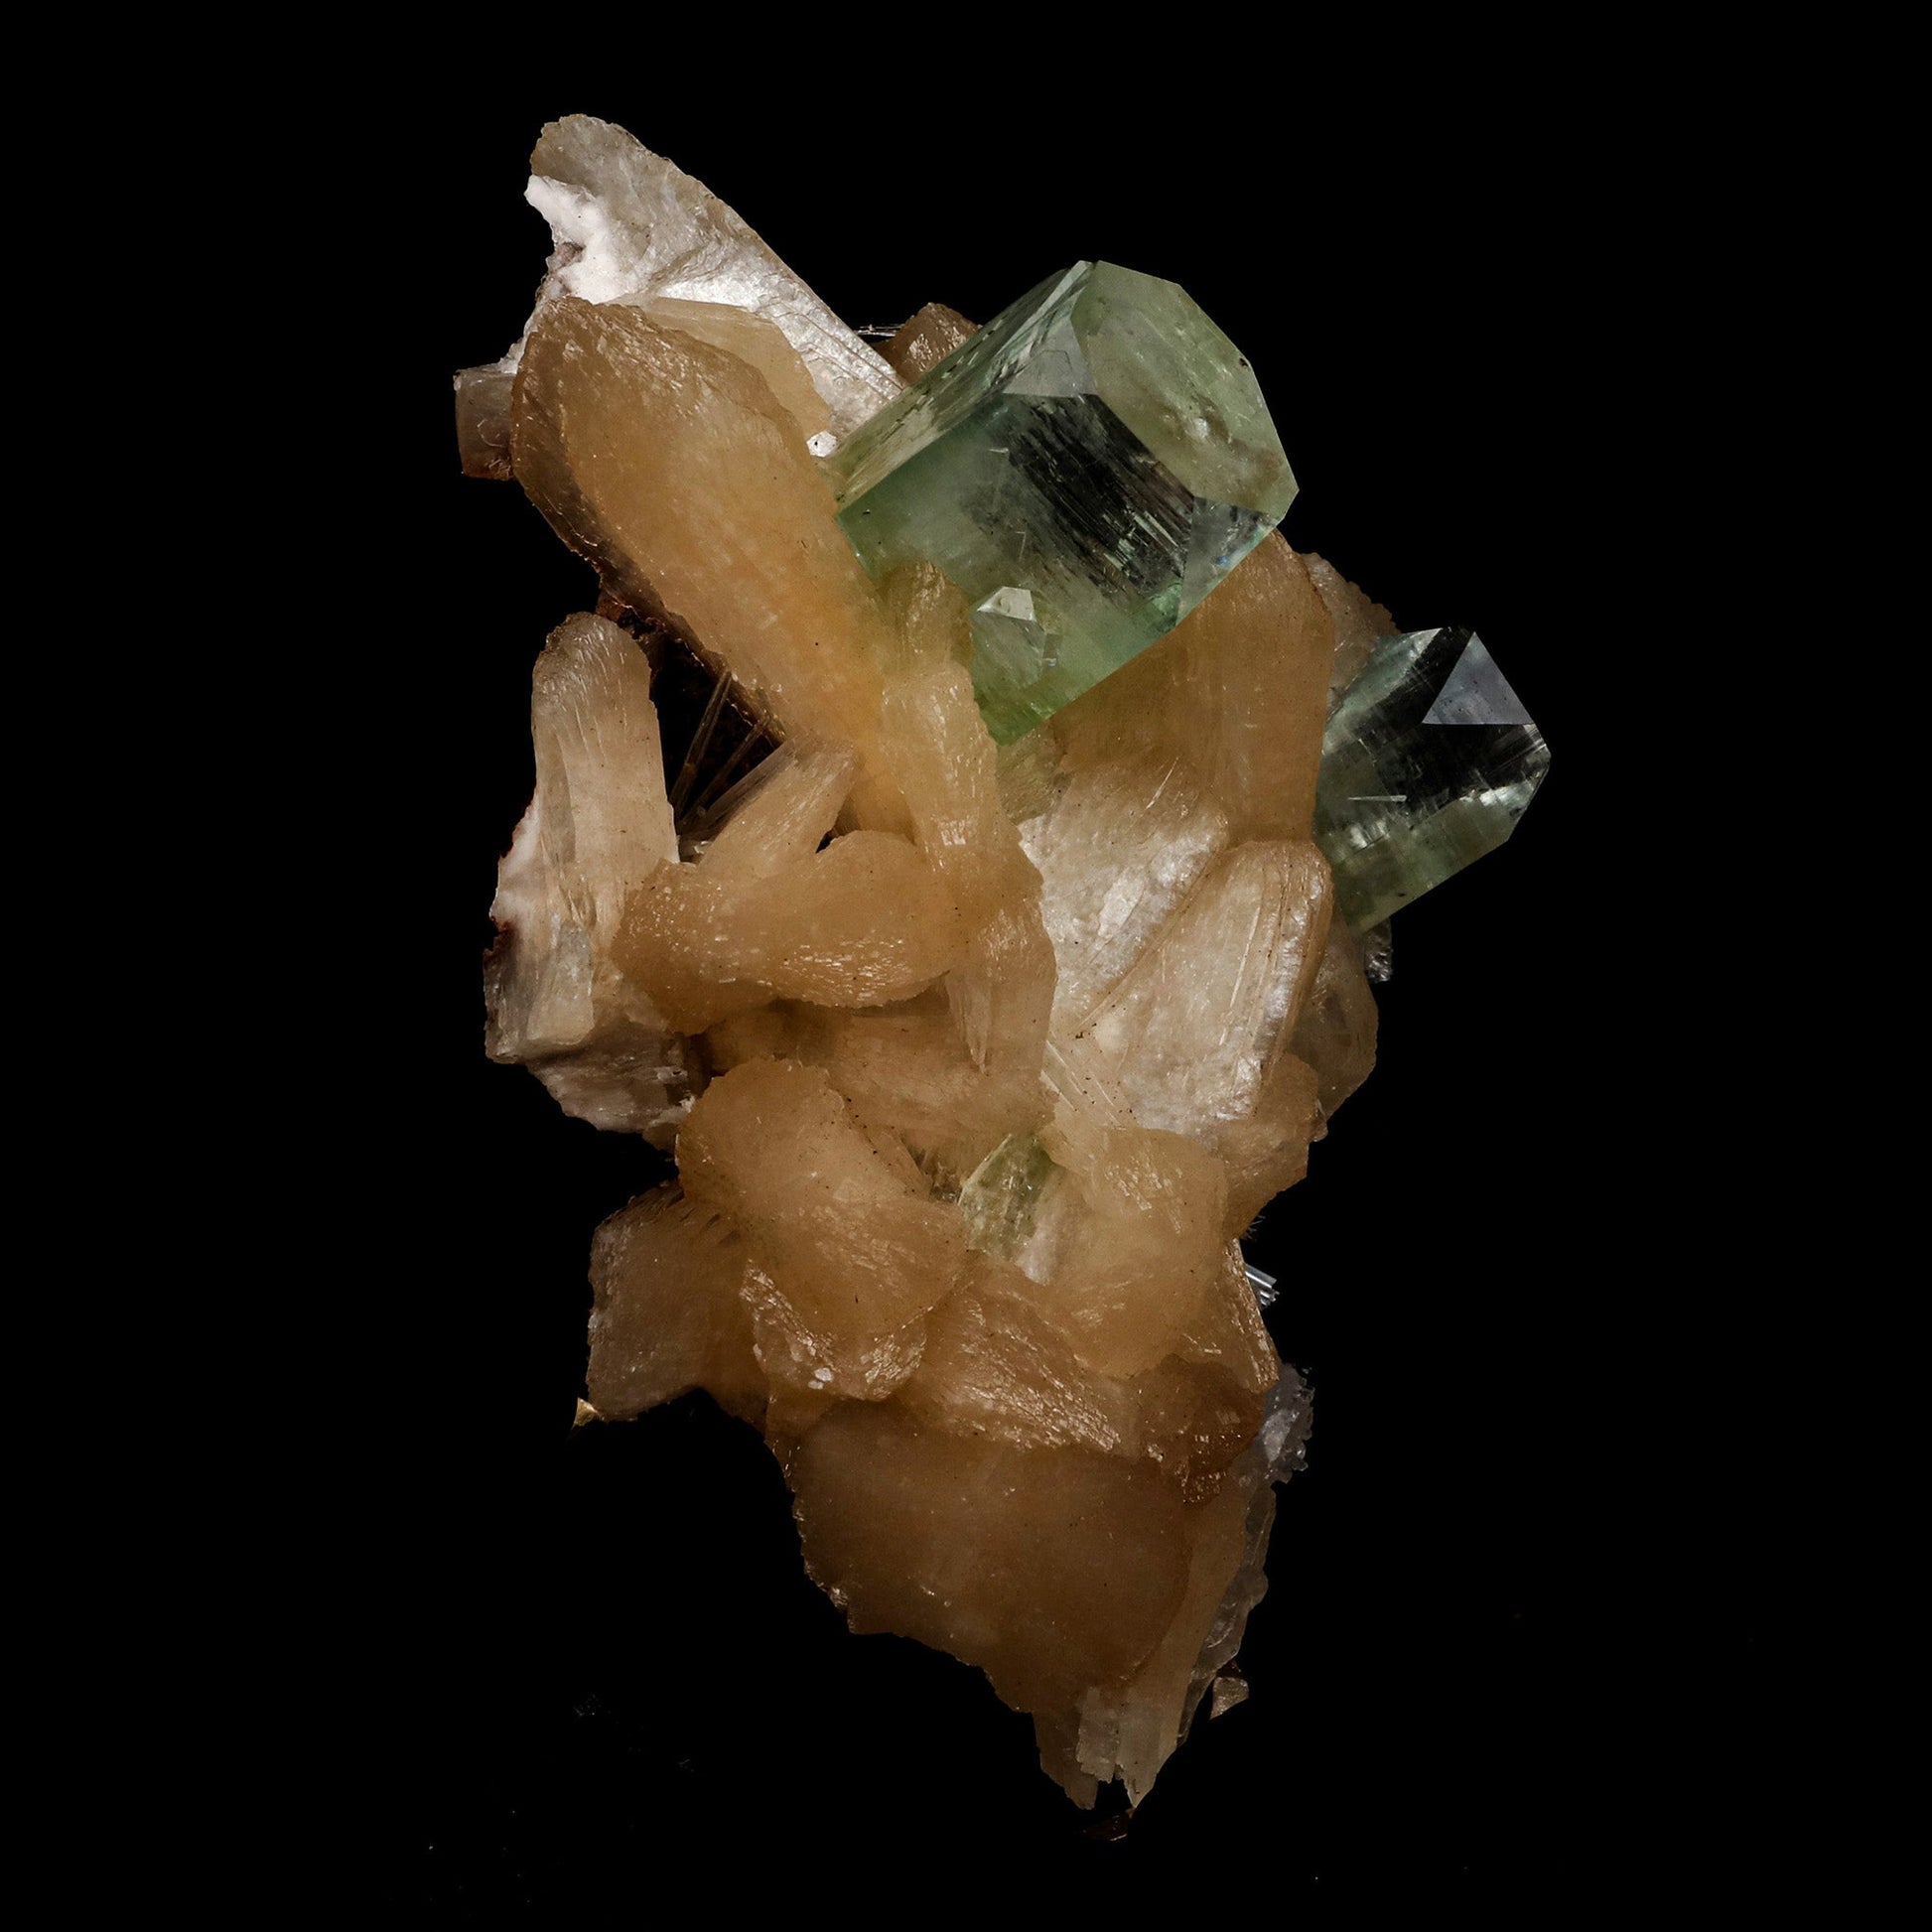 Green Apophyllite Pesudo Crystals with Scolecite on Stilbite Natural M…  https://www.superbminerals.us/products/green-apophyllite-pesudo-crystals-with-stilbite-natural-mineral-specimen-b-5237  Features: A very aesthetic combination piece featuring numerous large, lustrous green modified cubes on a dark-brown matrix hosting numerous acicular sprays of colorless to white, satiny Scolecite Primary Mineral(s): Apophyllite Secondary Mineral(s): Stilbite, ScoleciteMatrix: N/A 5 Inch x 3 InchWeight : 280